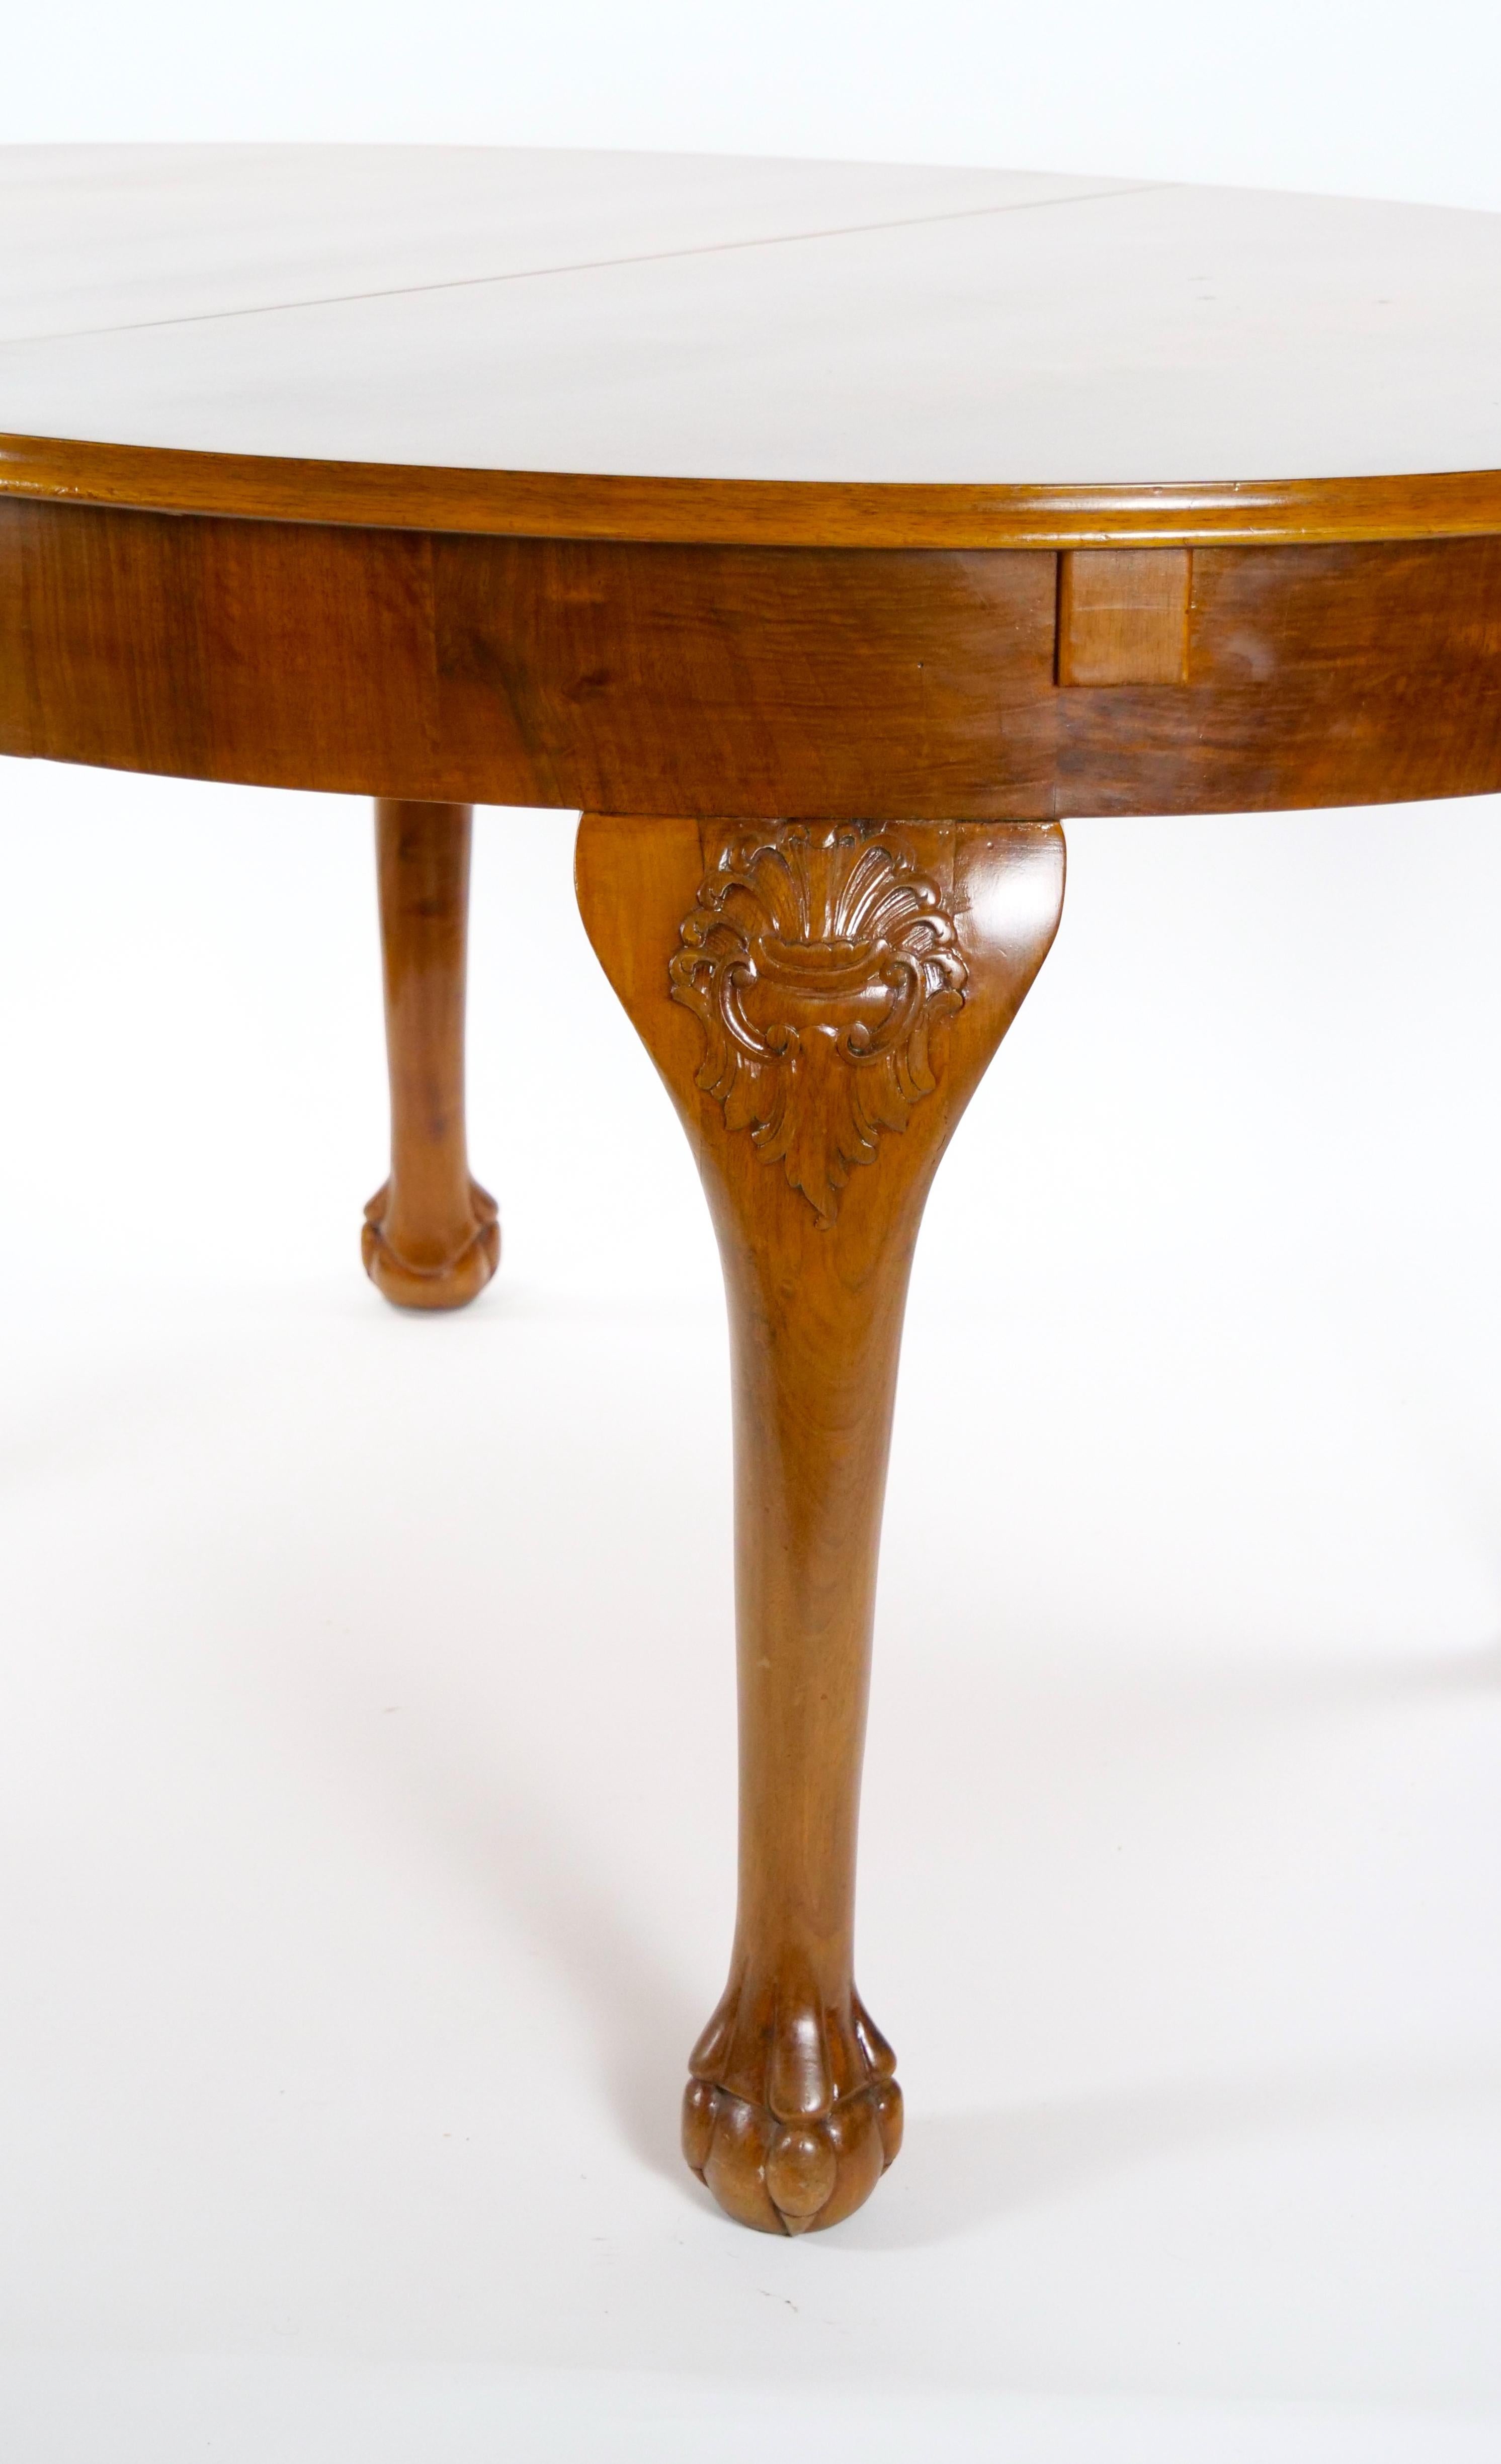 Early 20th Century Italian Hand Carved Walnut Neoclassical Style Dining Table For Sale 2